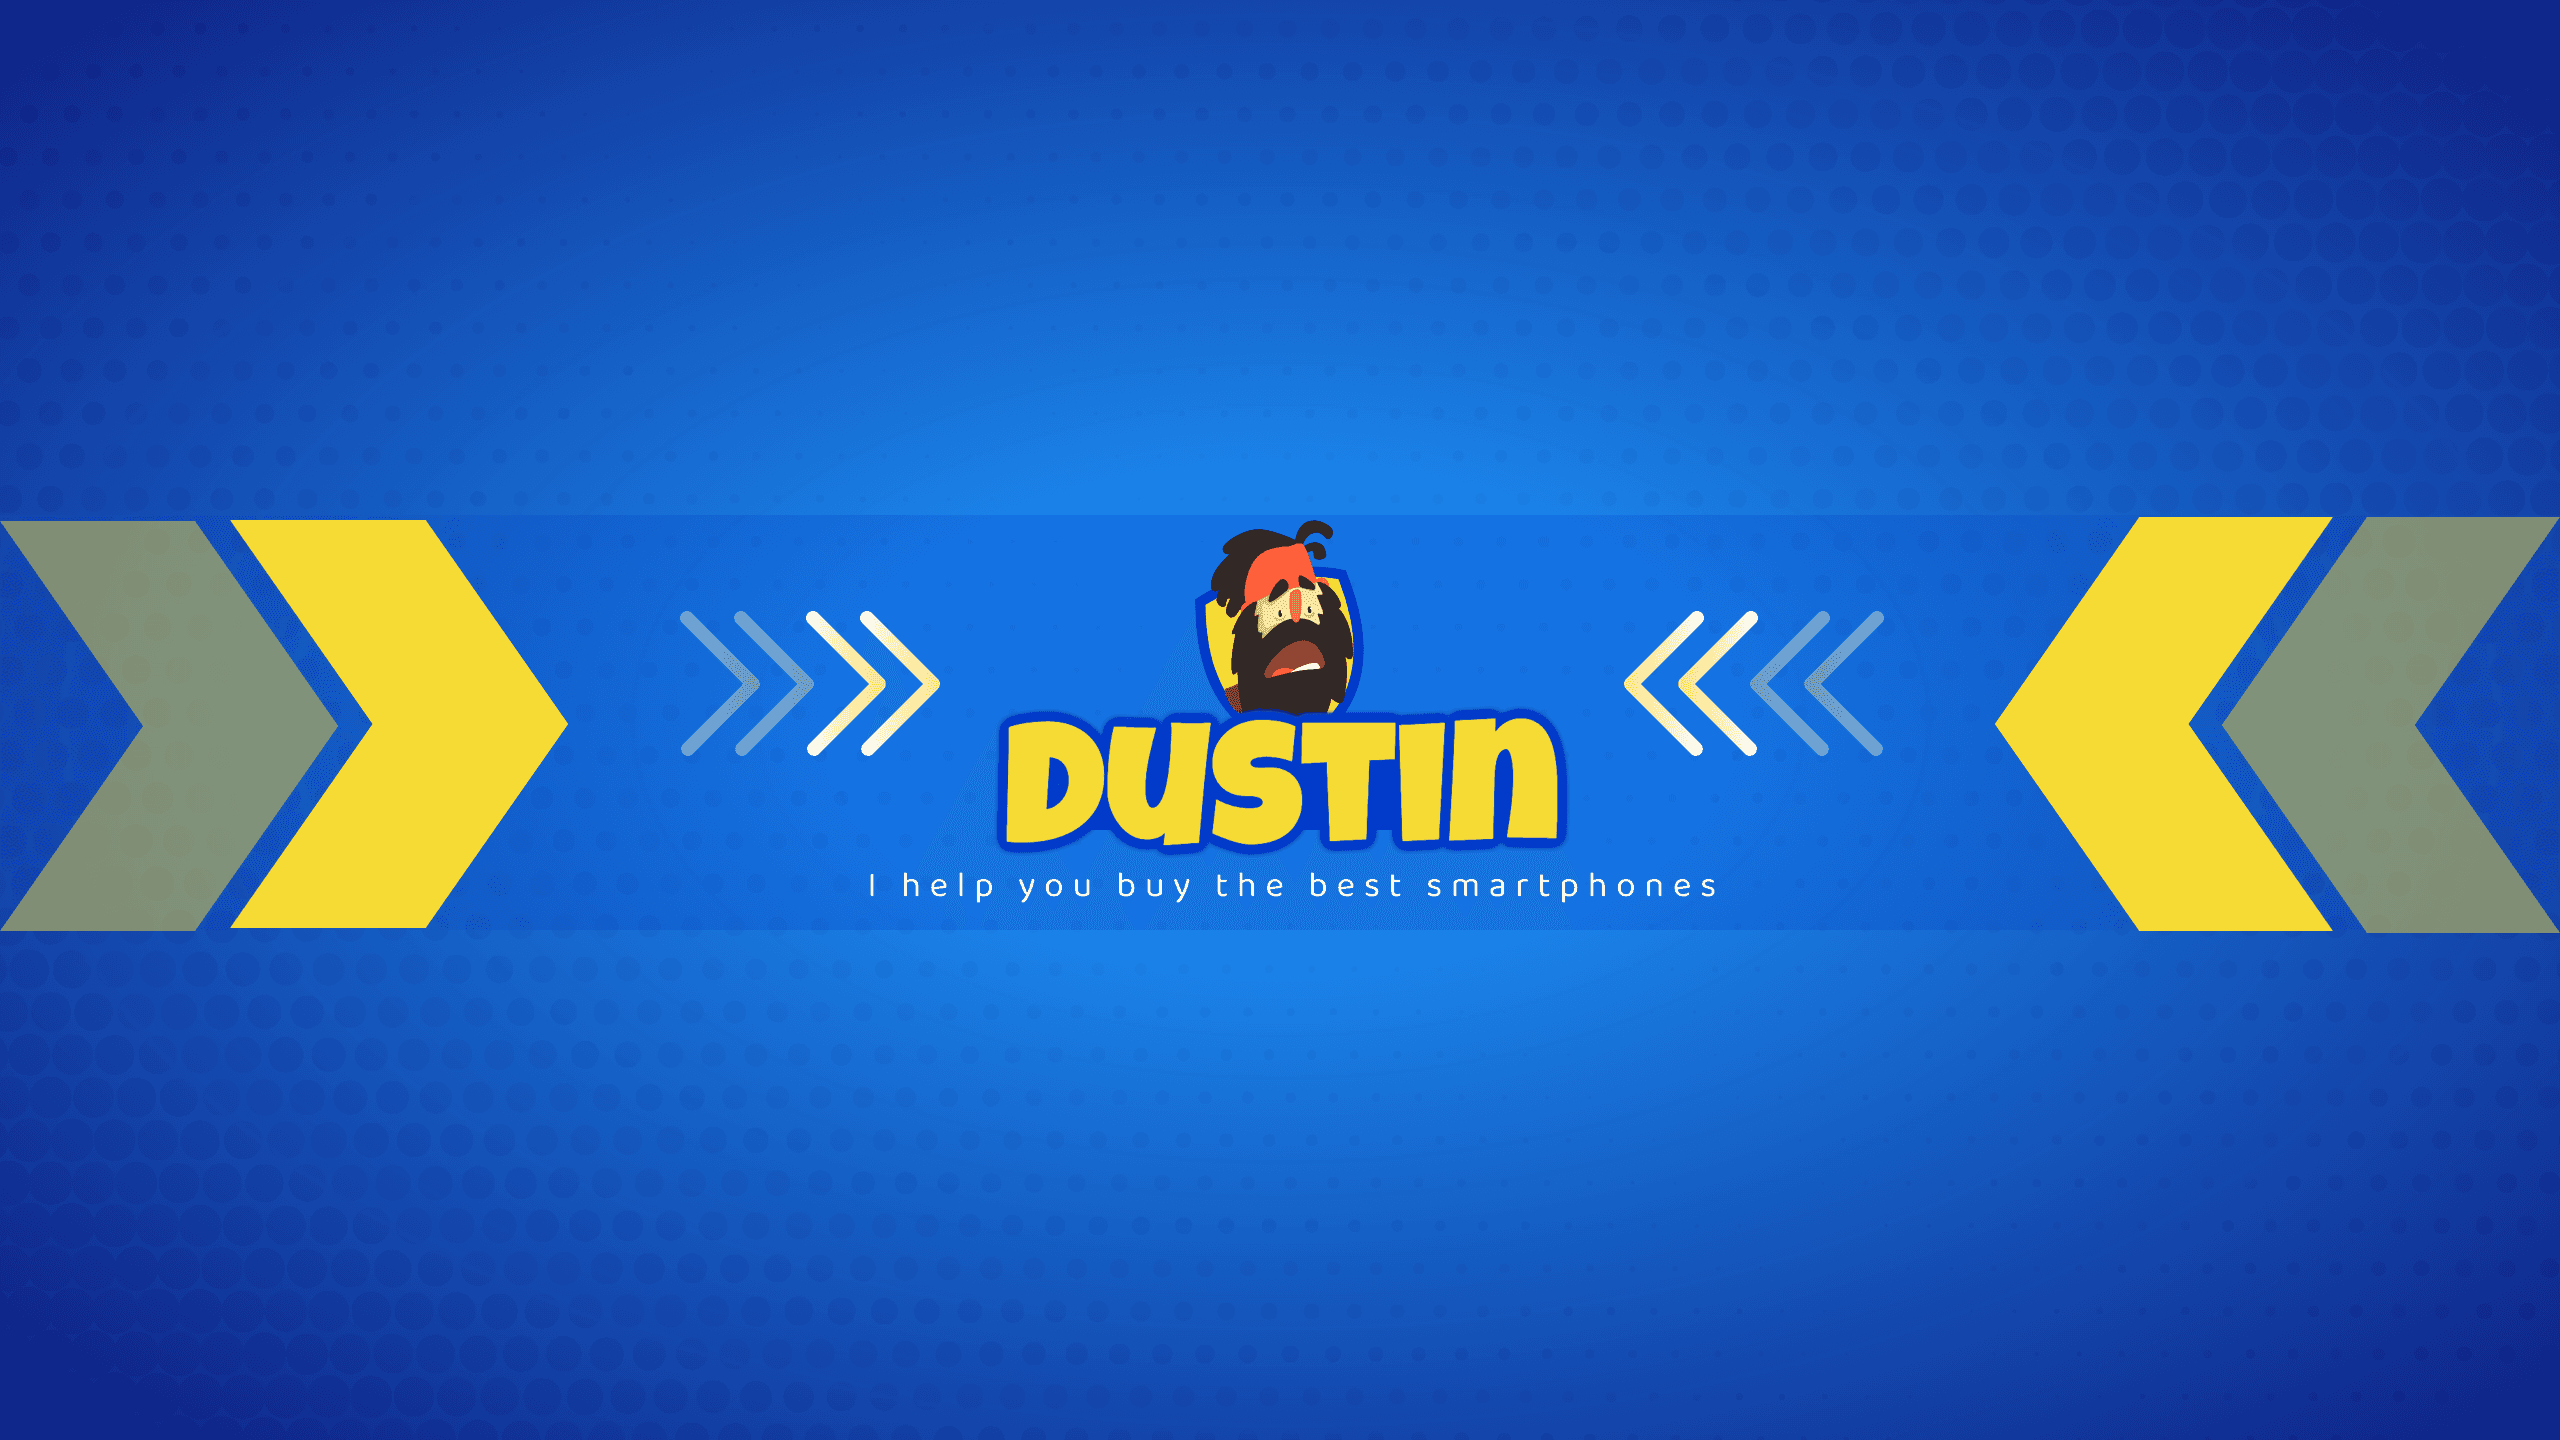 dustin-smartphone-advice-and-review-youtube-channel-art-thumbnail-img